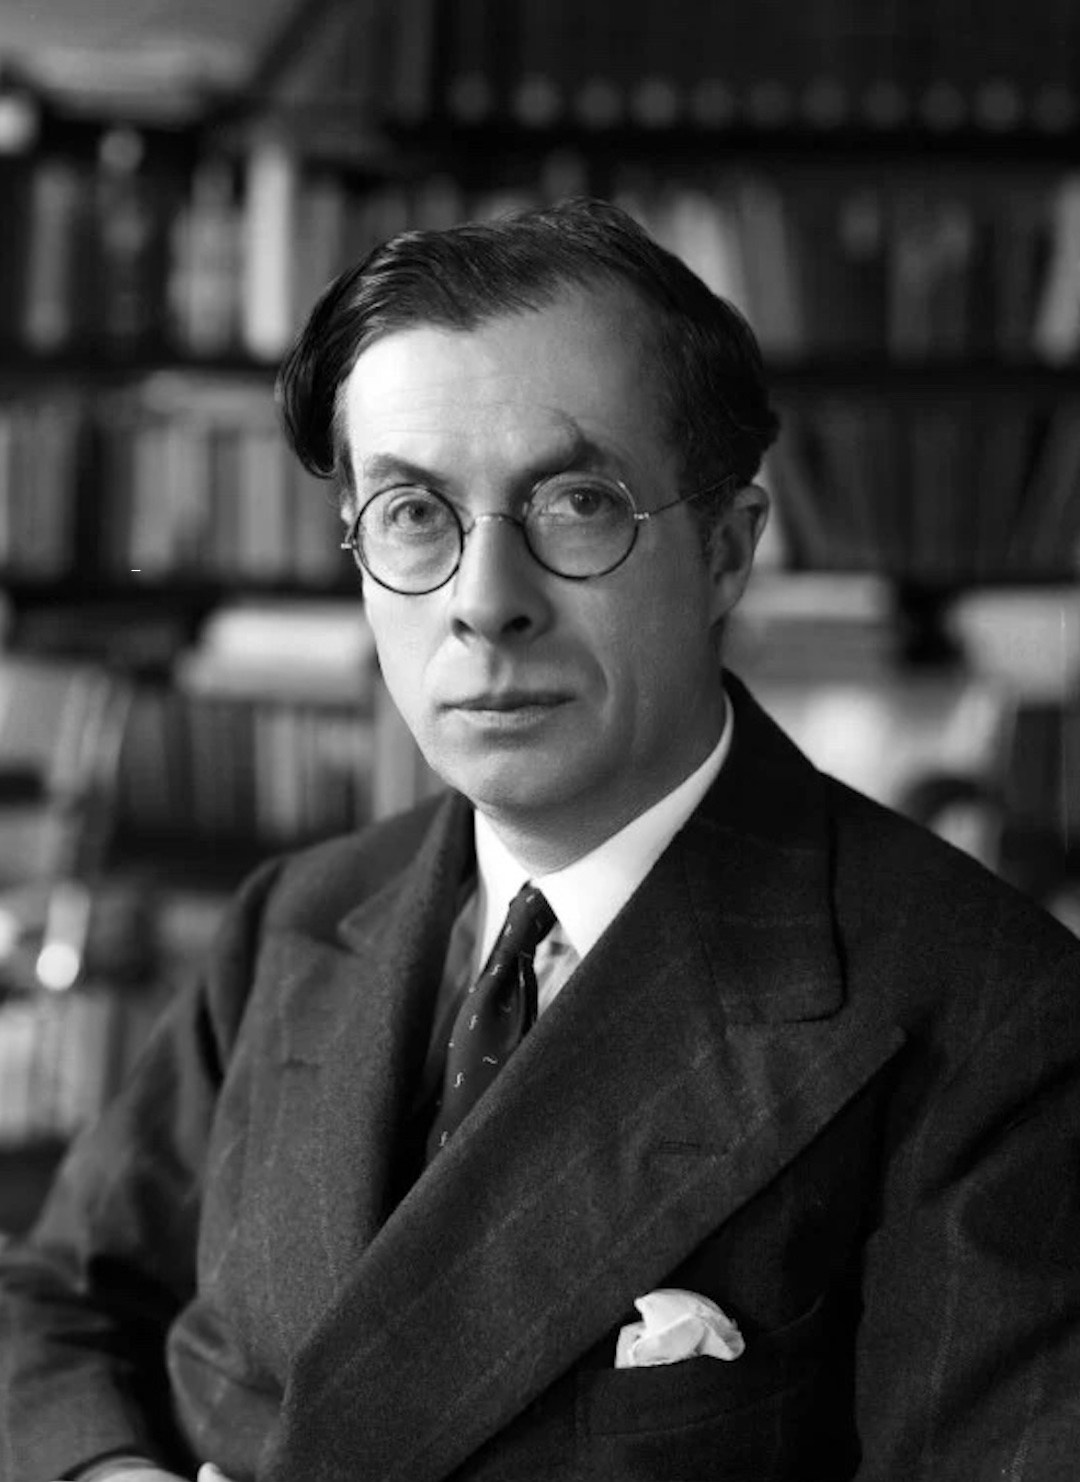 Julian Huxley - First Director of UNESCO, globalist agent, President of the British Eugenics Society 1959-1962, brother of Aldous Huxley (author of 'Brave New World').